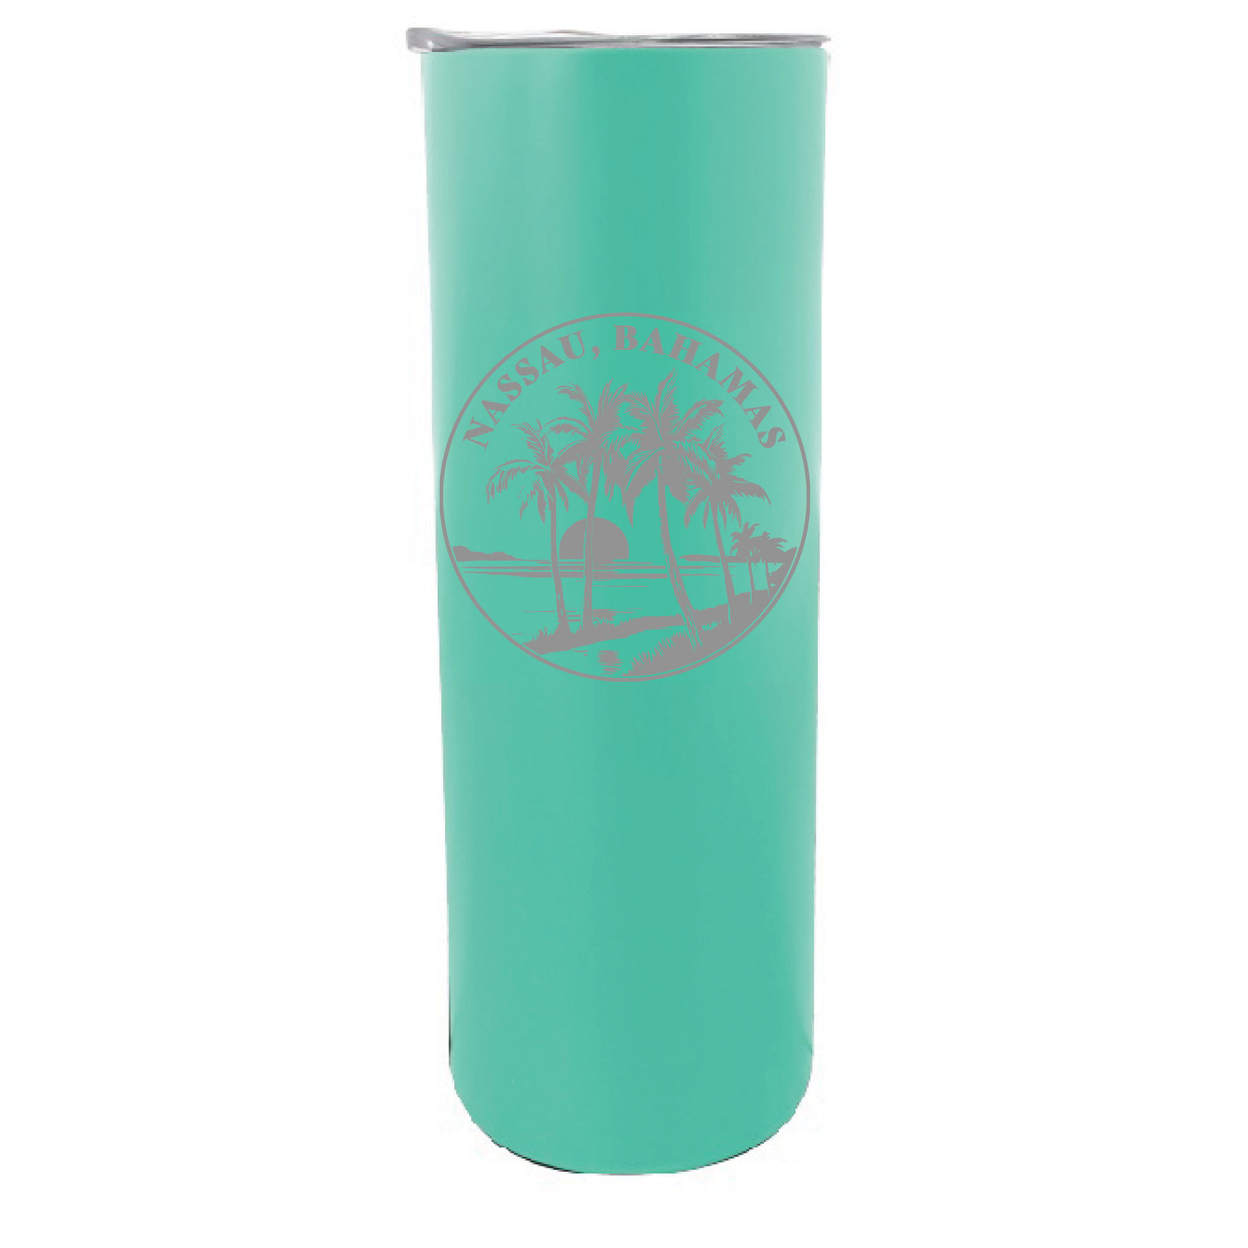 Nassau The Bahamas Souvenir 20 Oz Engraved Insulated Stainless Steel Skinny Tumbler - Seafoam,,2-Pack